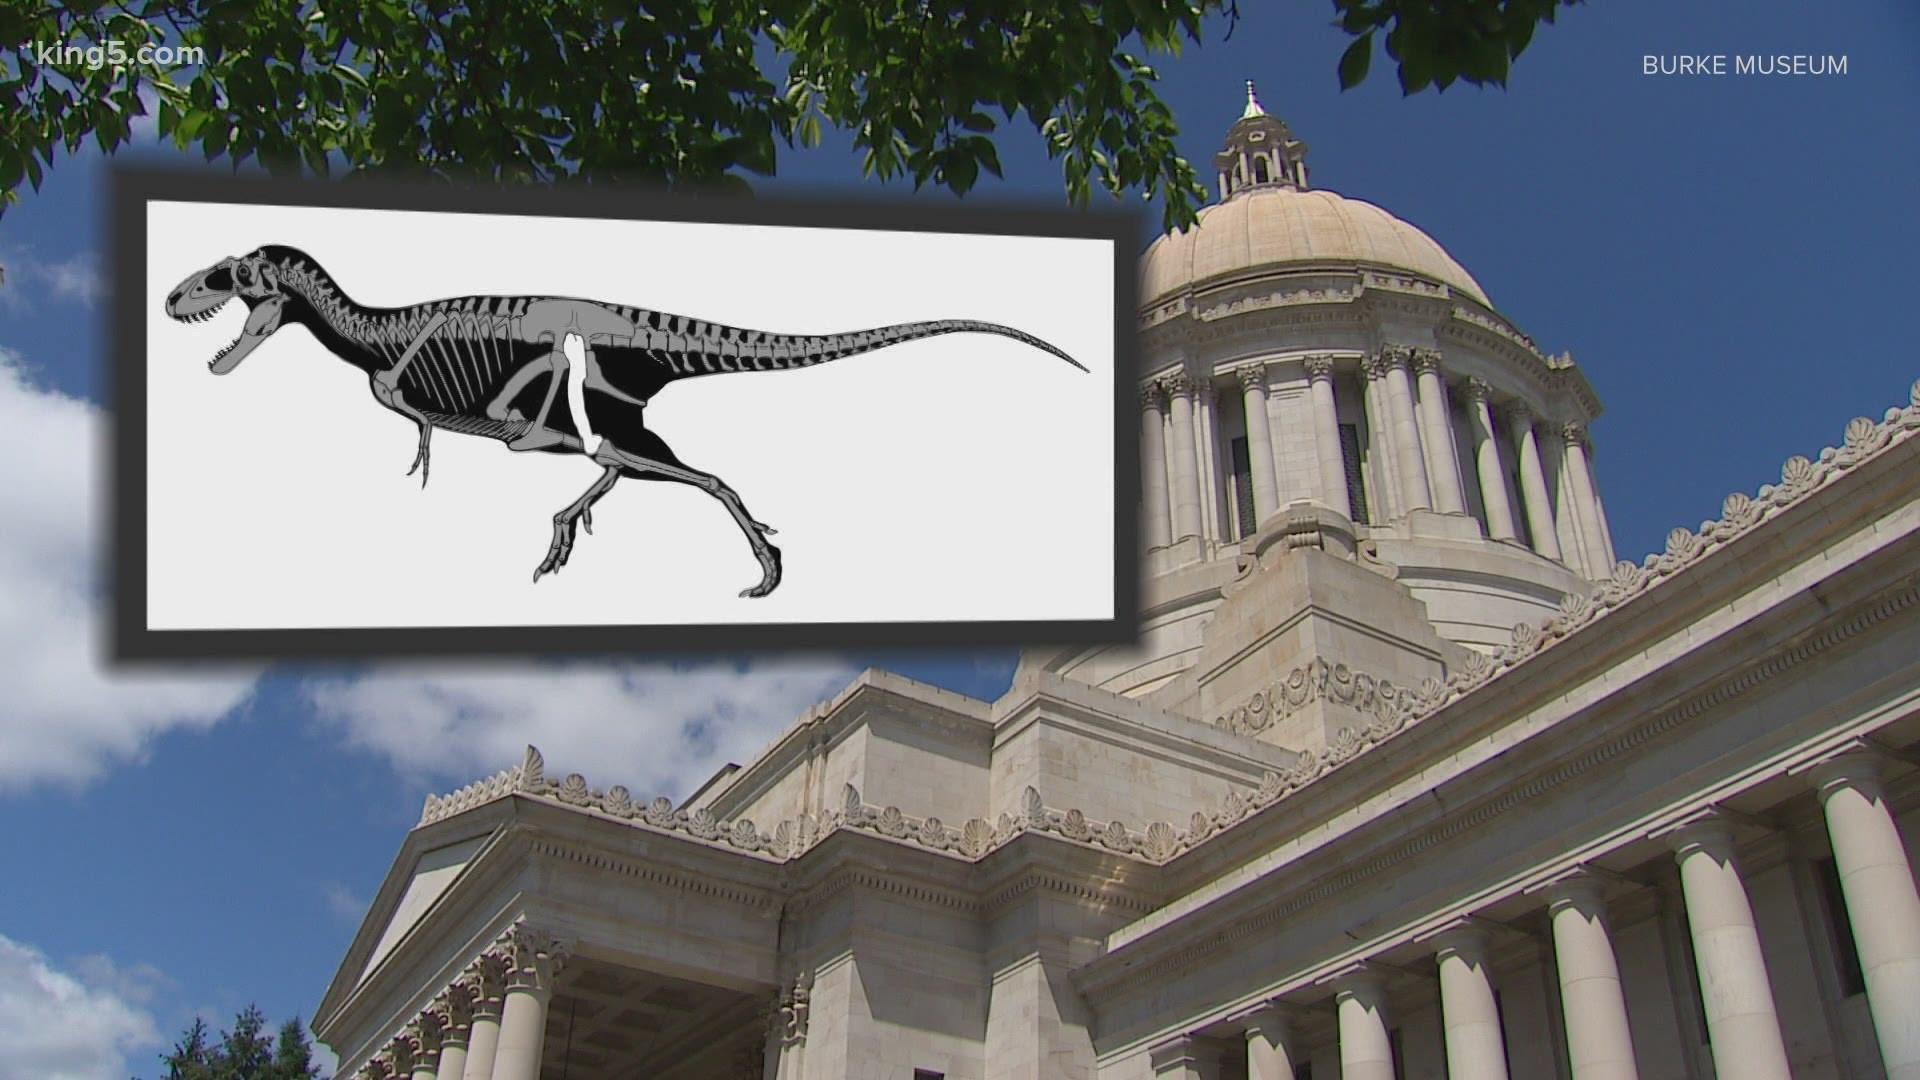 A fourth-grade class suggested making Suciasaurus Rex the official dinosaur. But some lawmakers say the legislation is a distraction during the coronavirus pandemic.